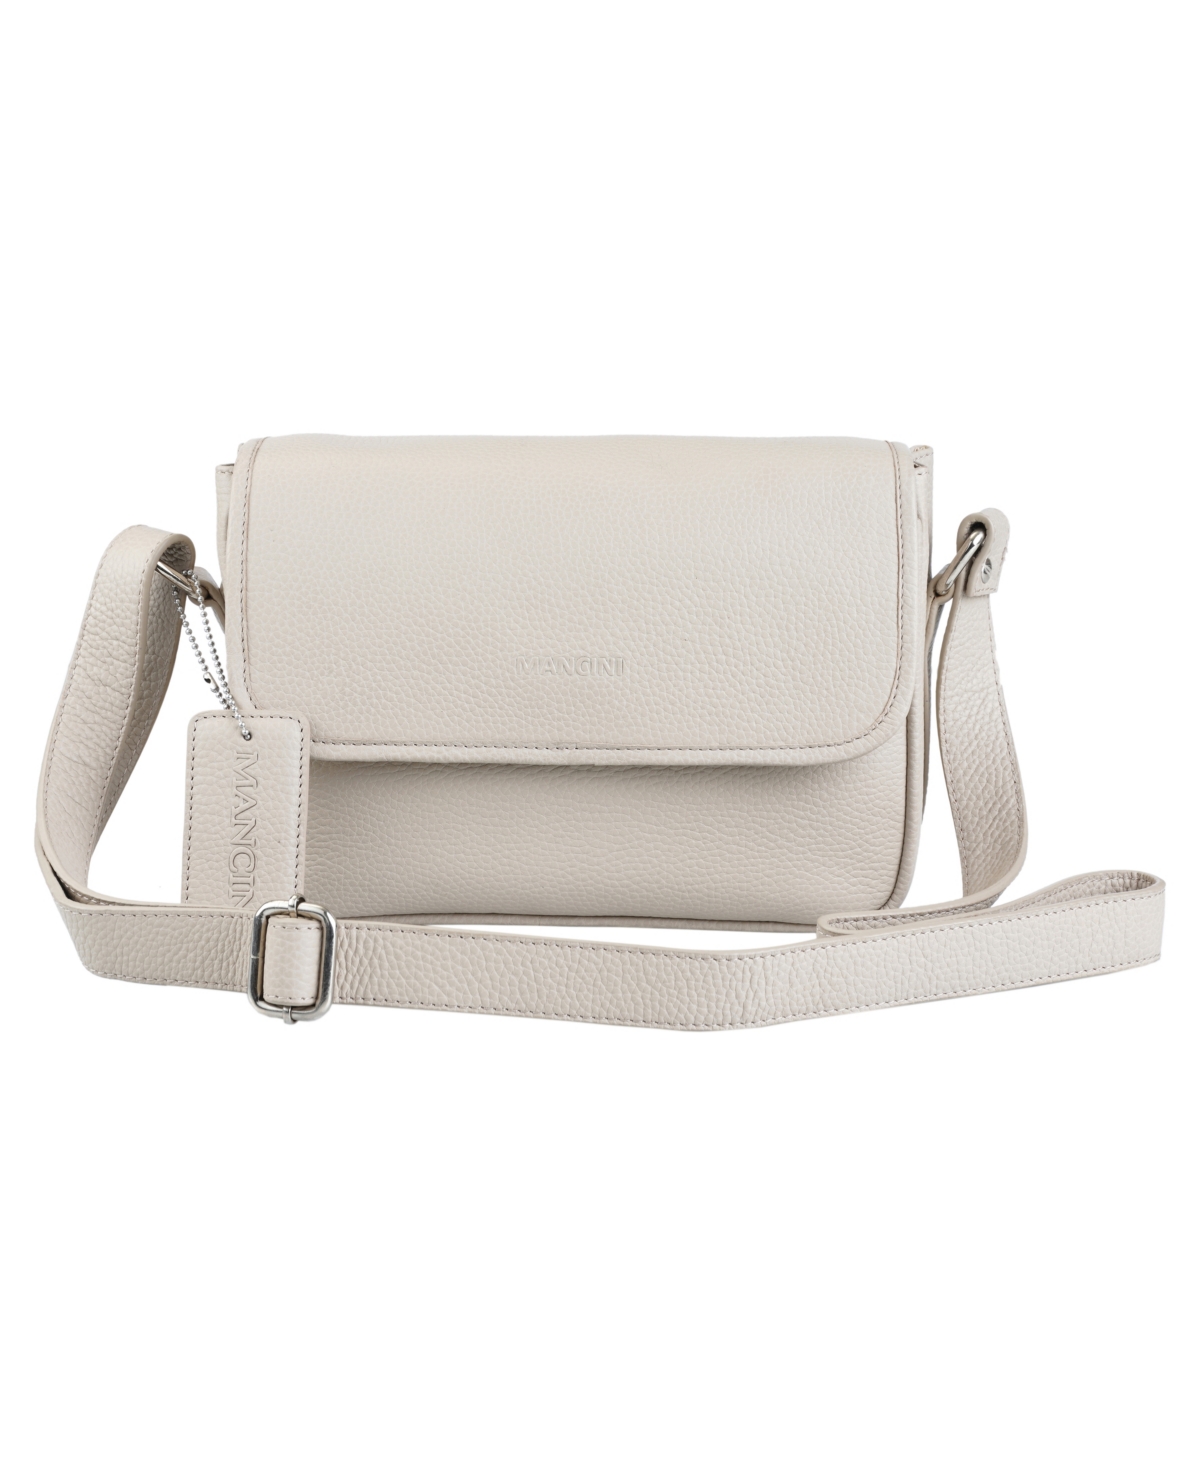 Mancini Pebbled Collection Kimberly Leather Flap Closure Handbag In Taupe